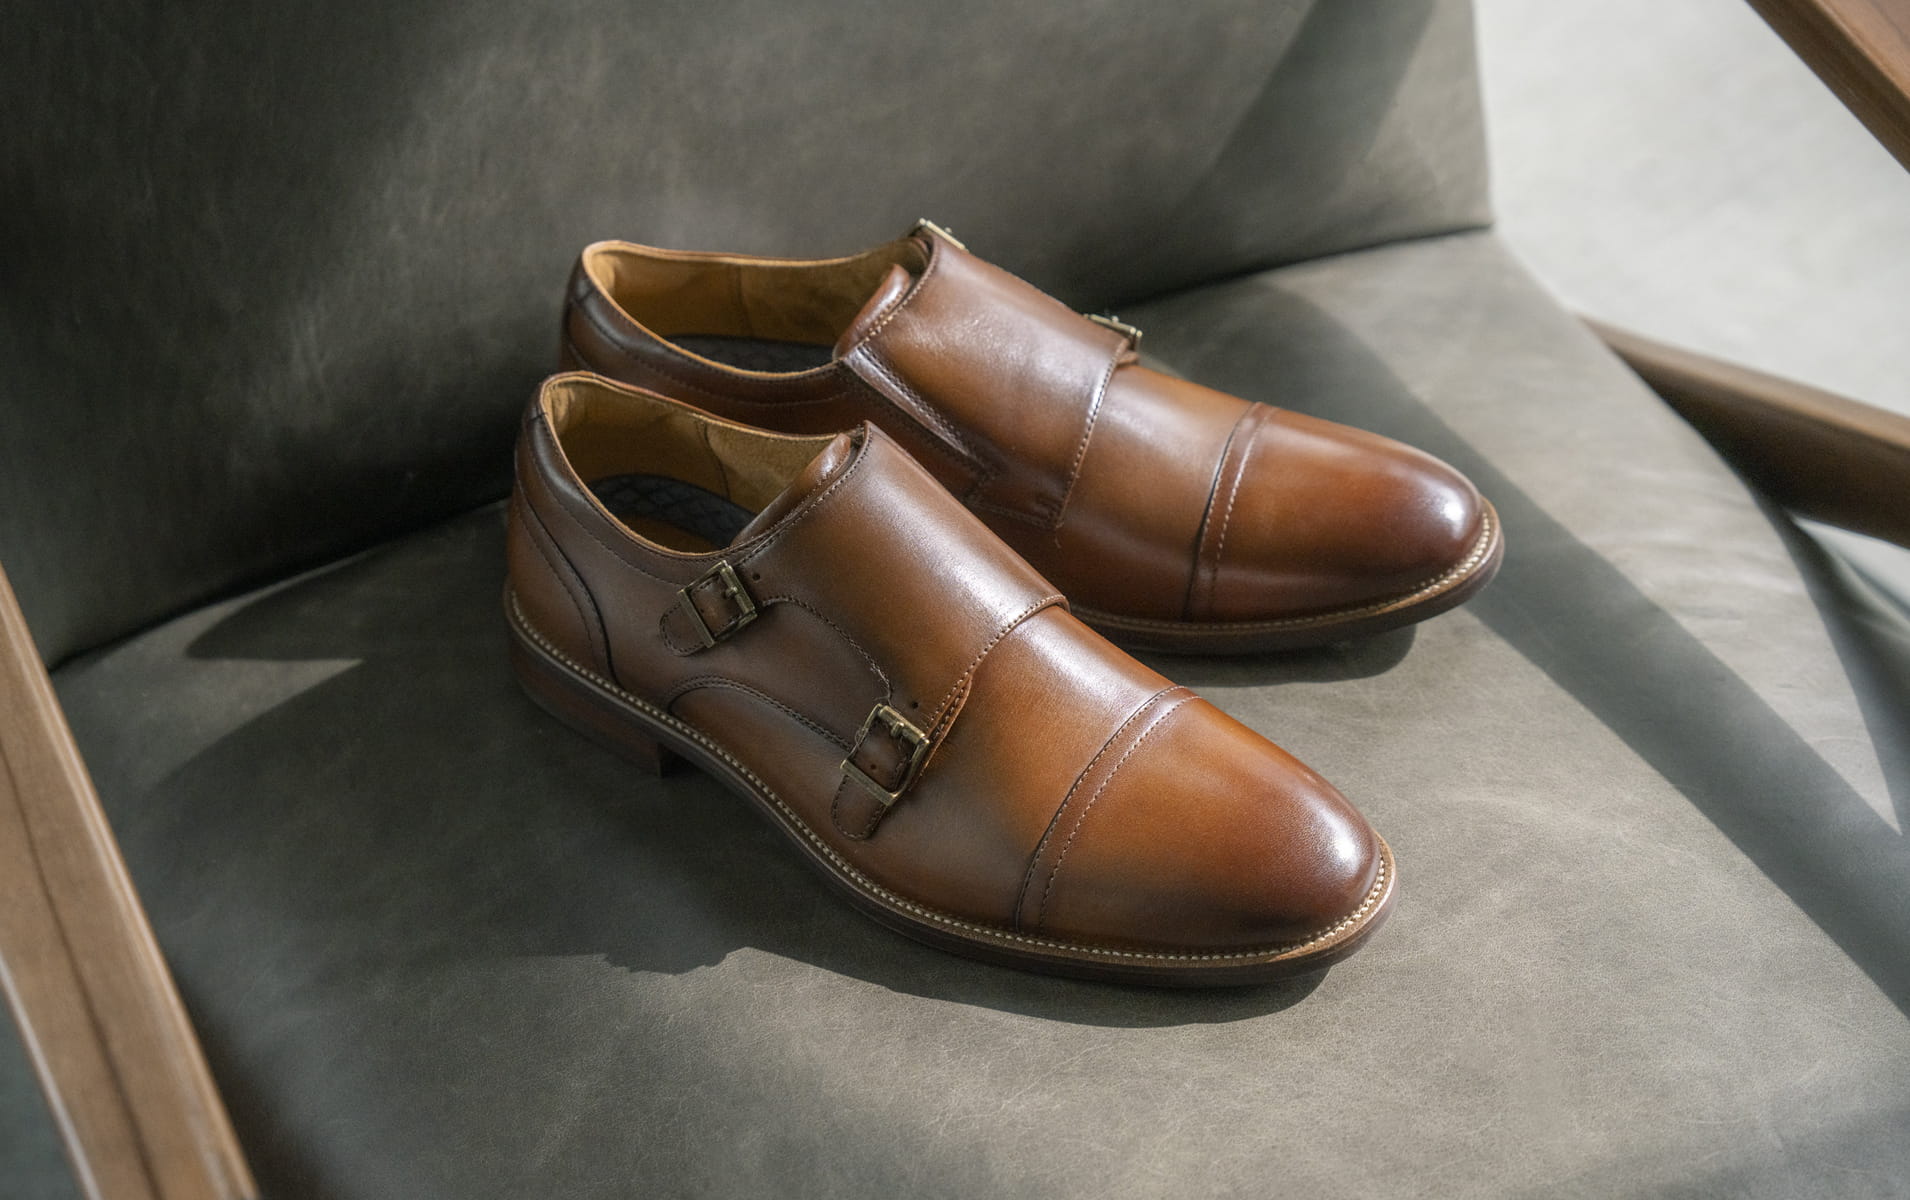 Florsheim dress featuring the Rucci Cap Toe Double Monk in cognac on a grey chair.